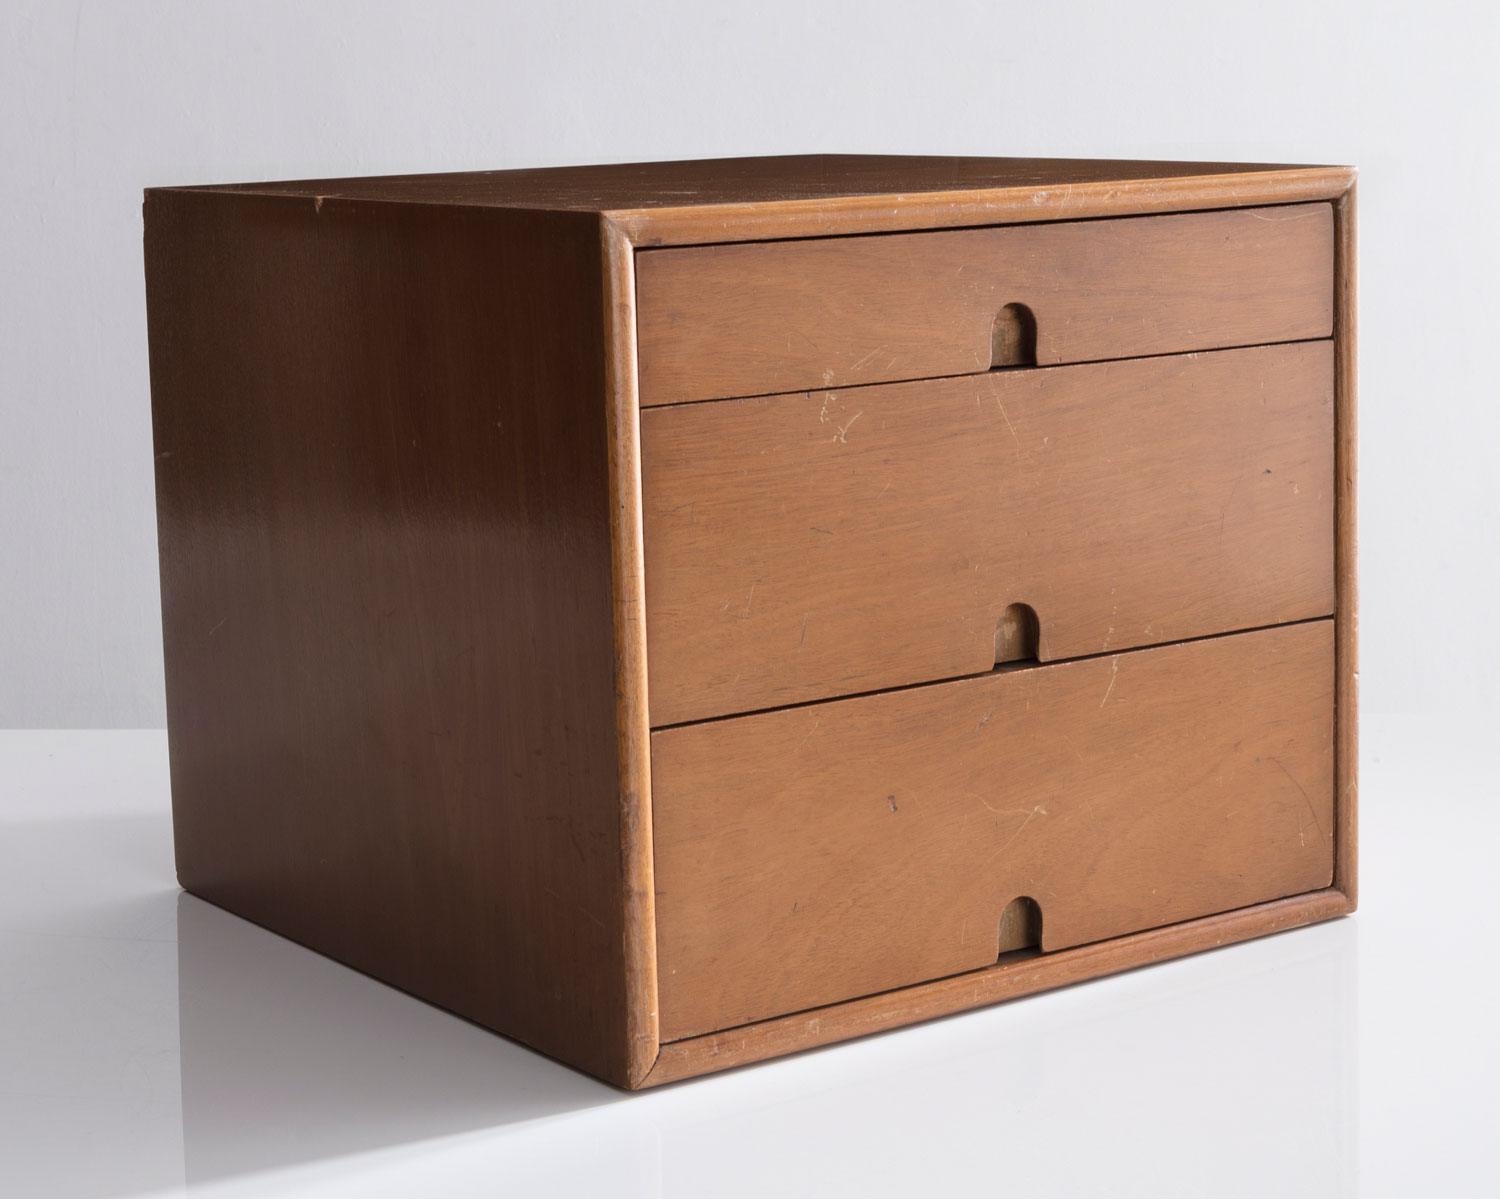 Small cabinet, designed by Charles Eames and Eero Saarinen, for MoMA’s Organic Design Competition.